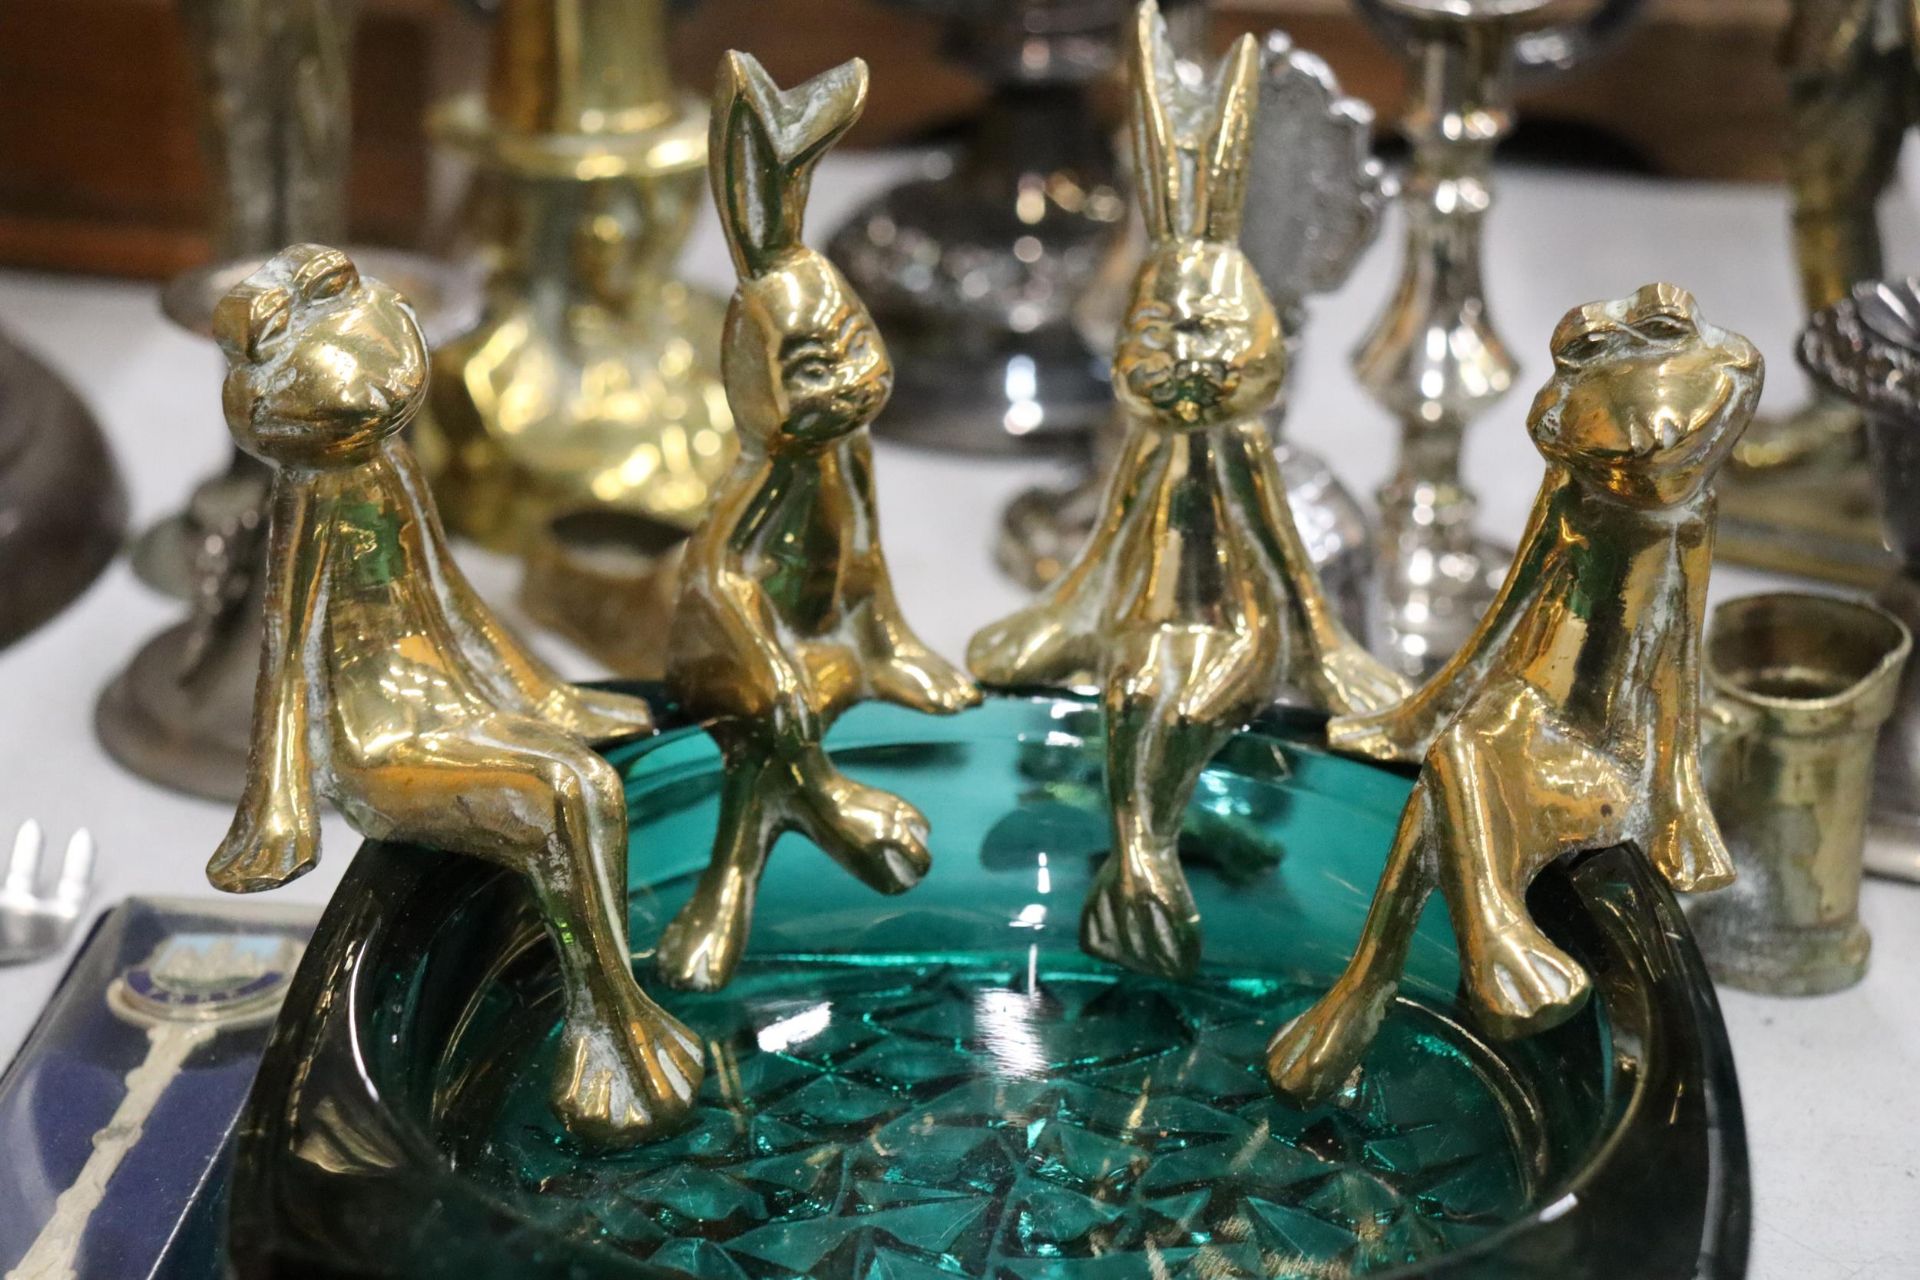 A QUANTITY OF BRASS AND SILVER PLATE TO INCLUDE A HEAVY POACHER FIGURE, CANDLESTICKS, ANIMAL - Image 4 of 15